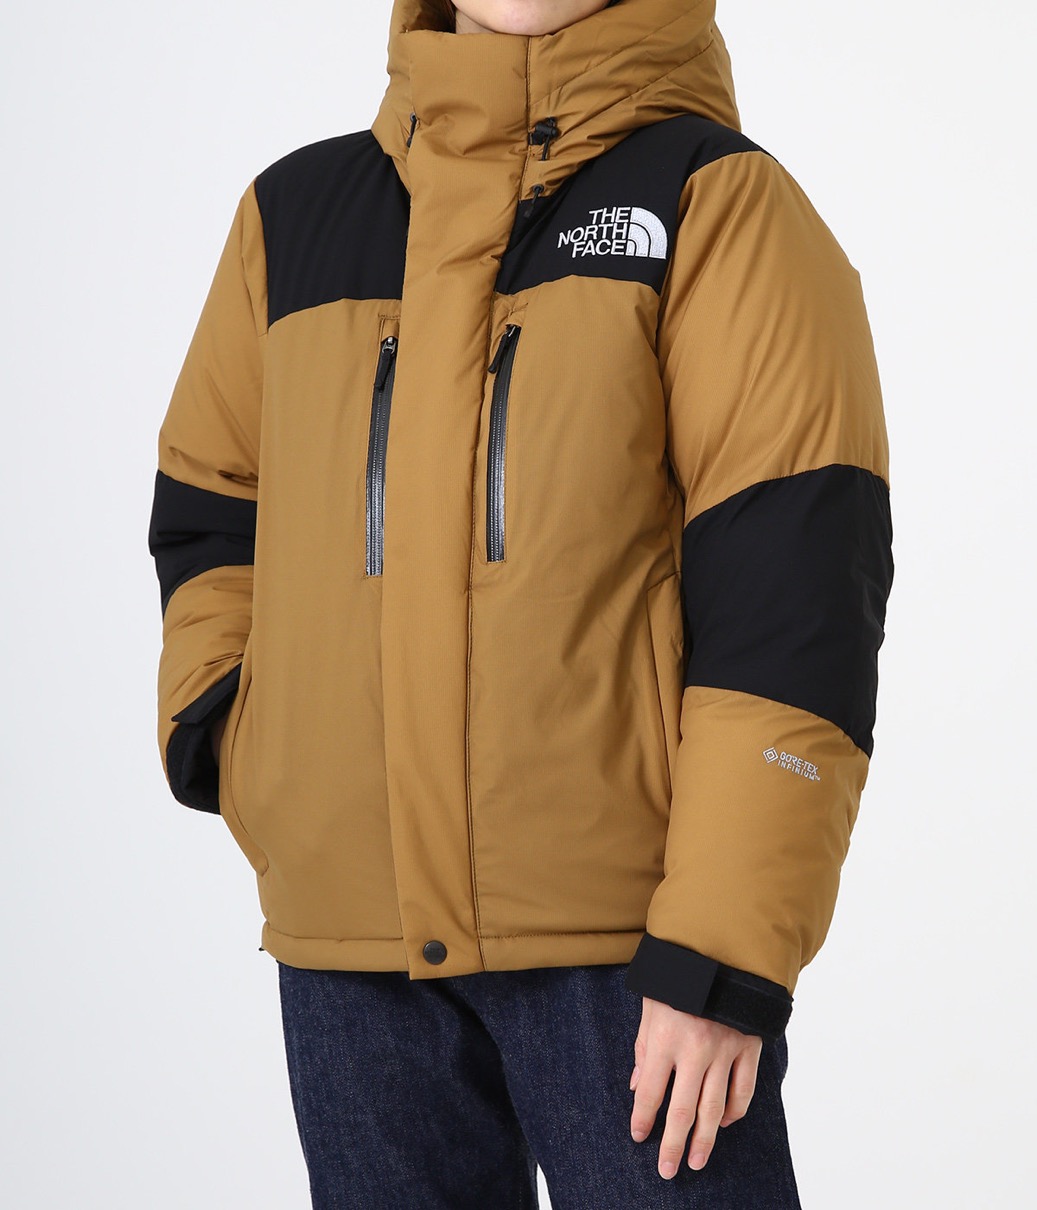 THE NORTH FACE 2021 バルトロライト ダウン